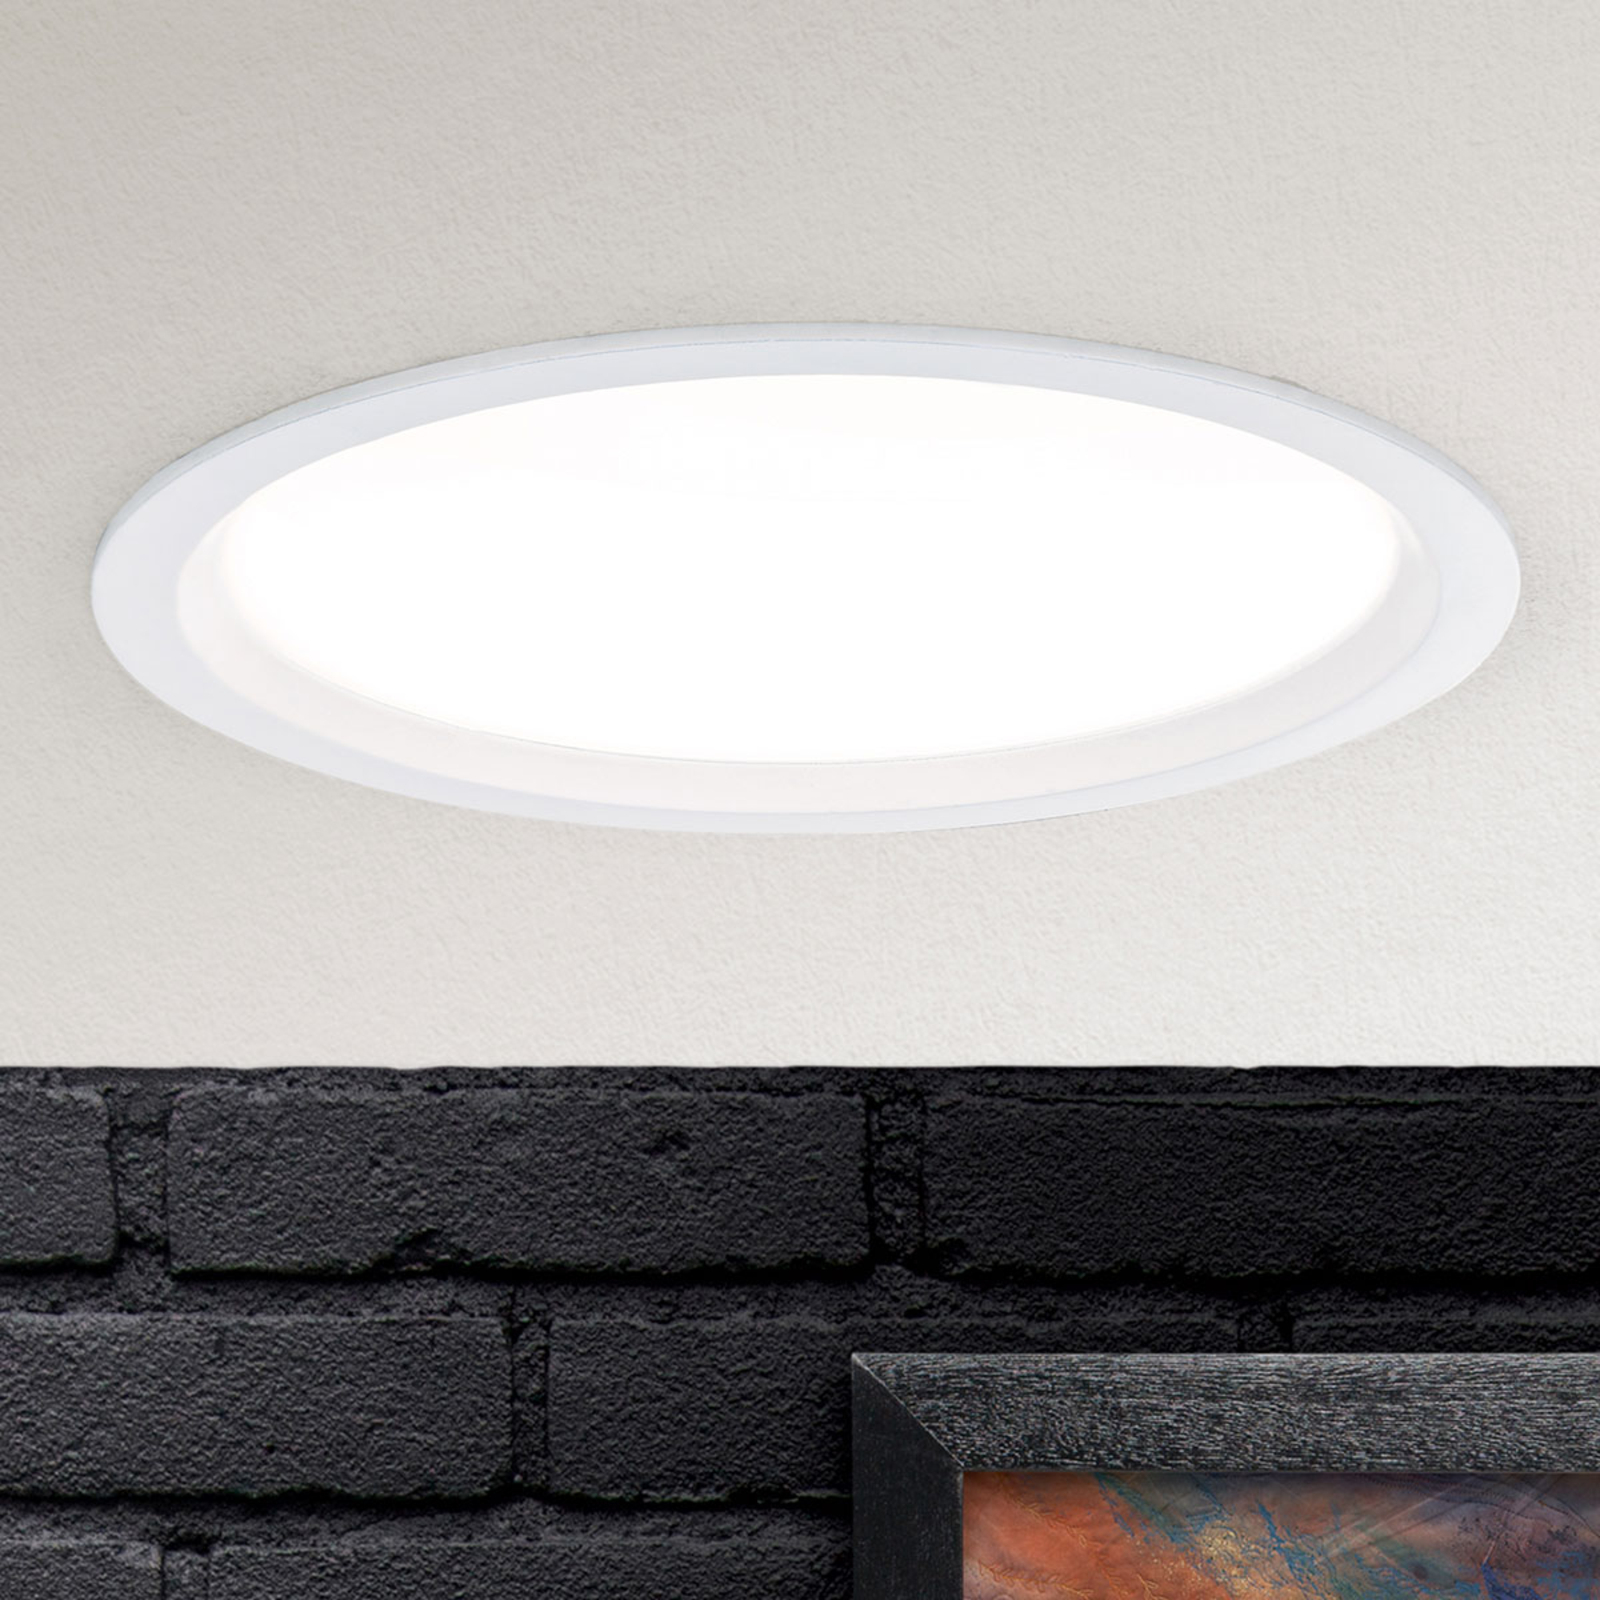 Spock LED recessed light dimmable Ø 17 cm white